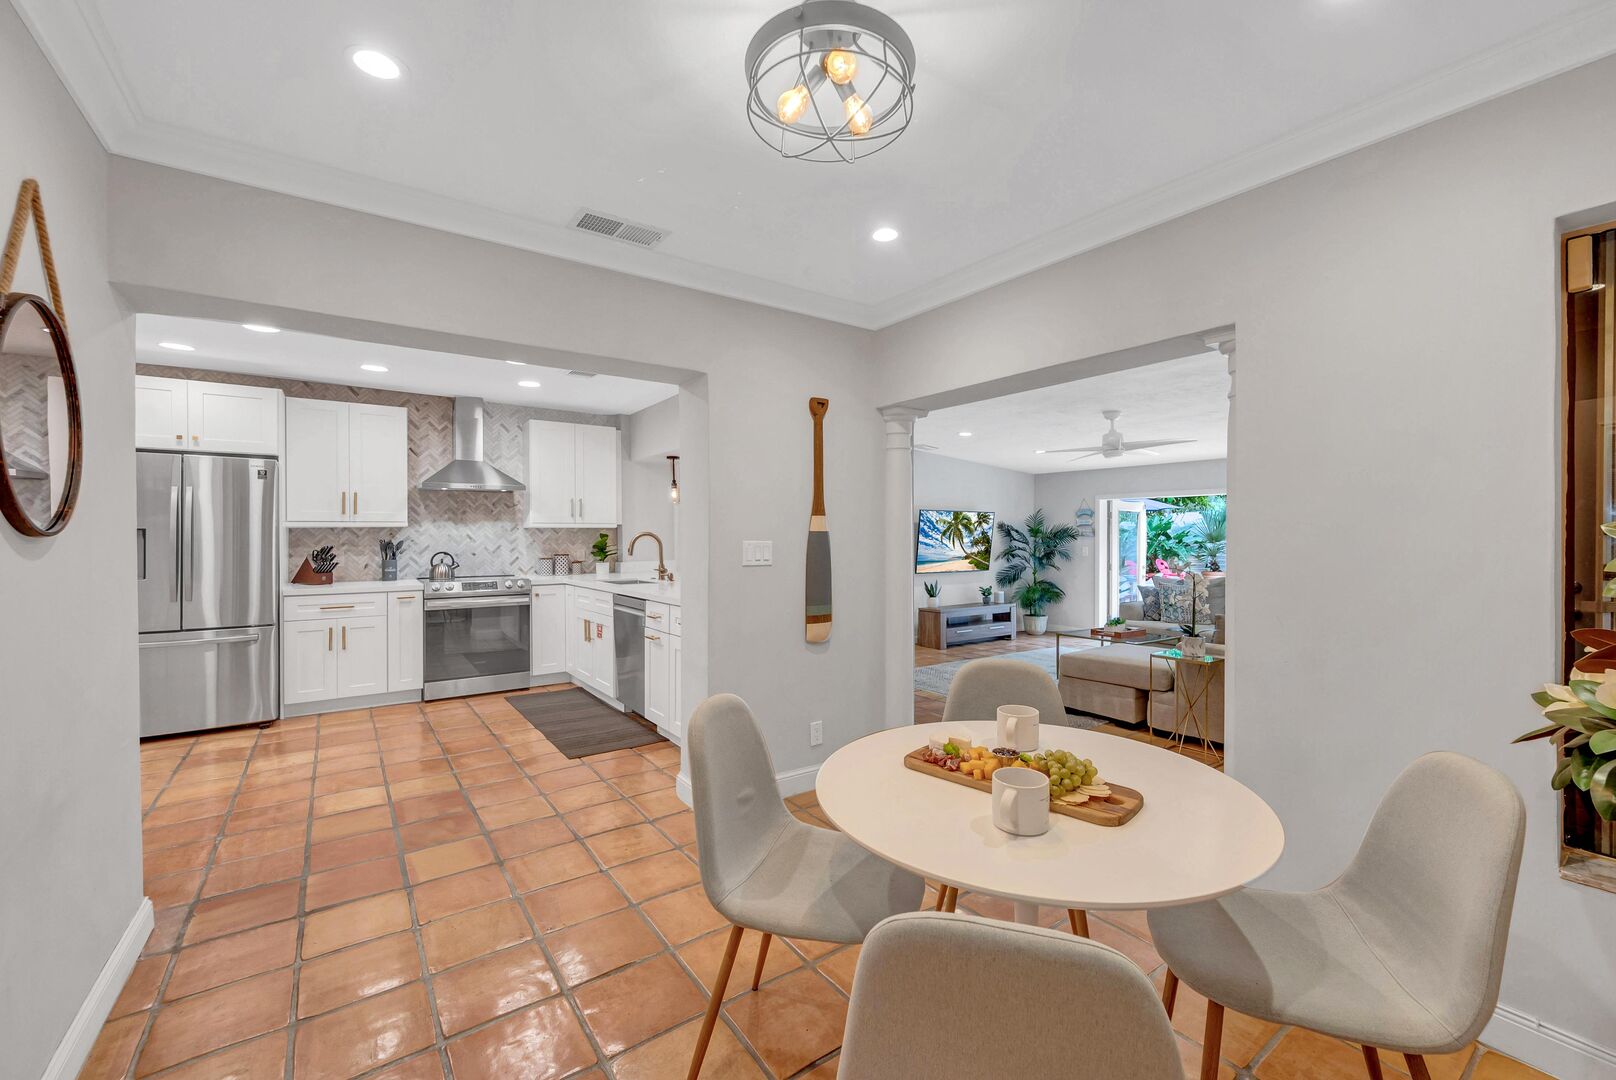 A breakfast nook is conveniently located by the kitchen.